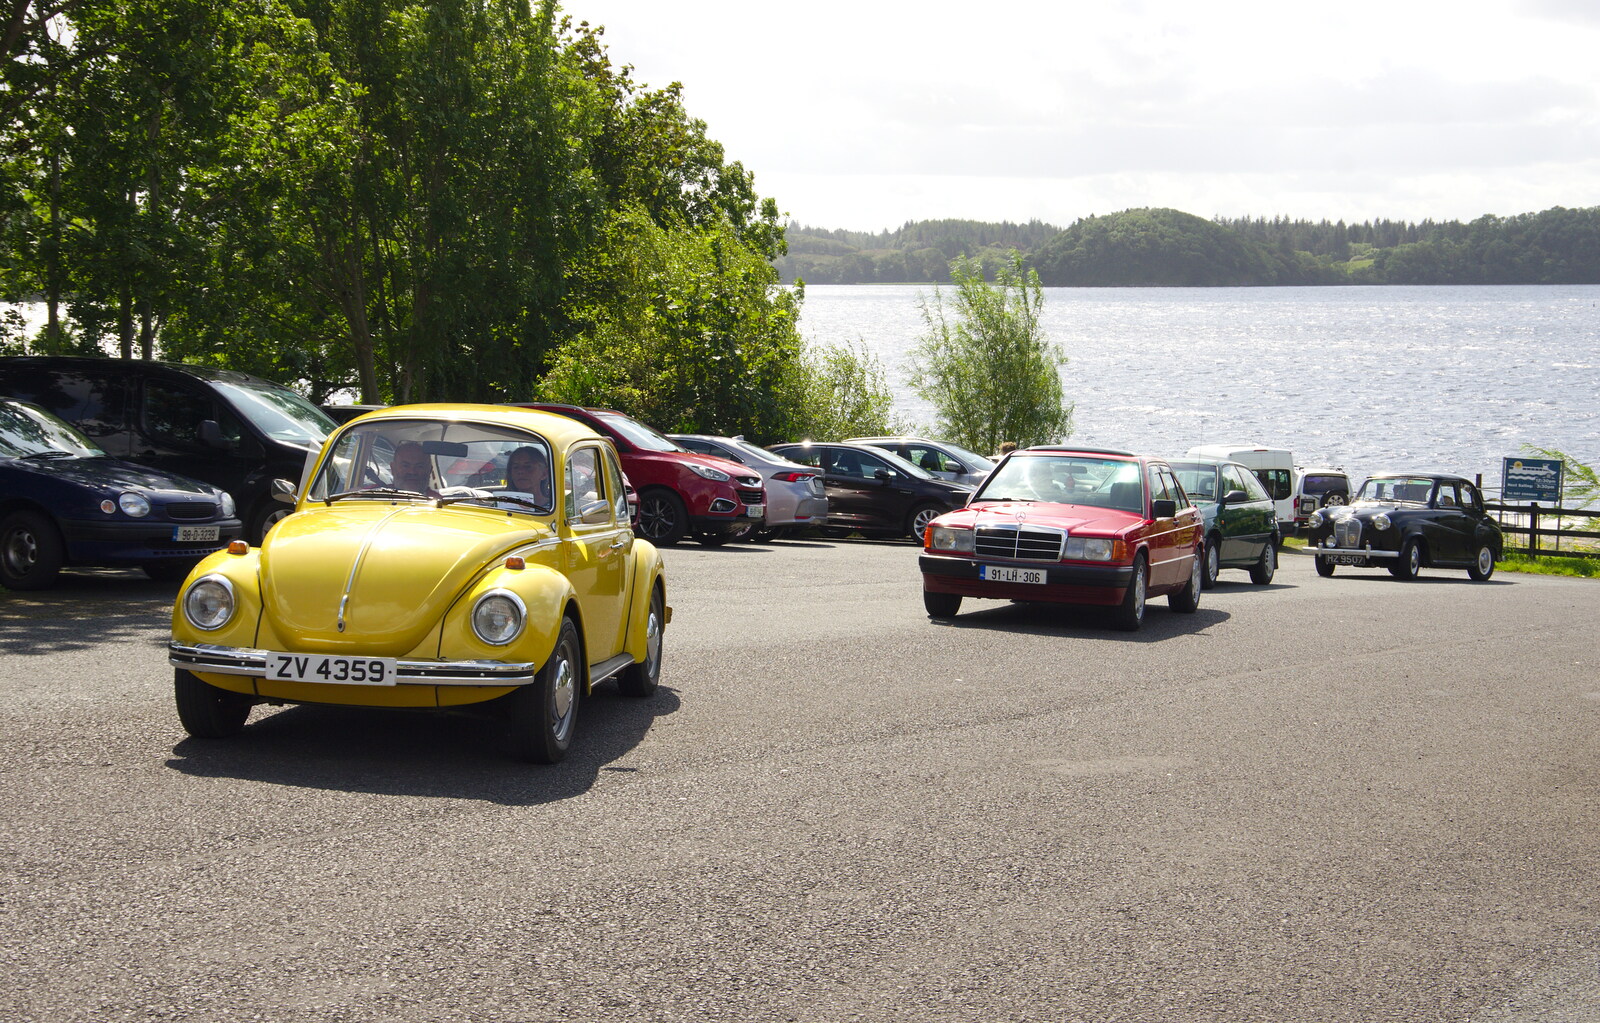 A Beetle, old Merc and a Morris leave the car park from Glencar Waterfall and Parke's Castle, Kilmore, Leitrim, Ireland - 18th August 2019